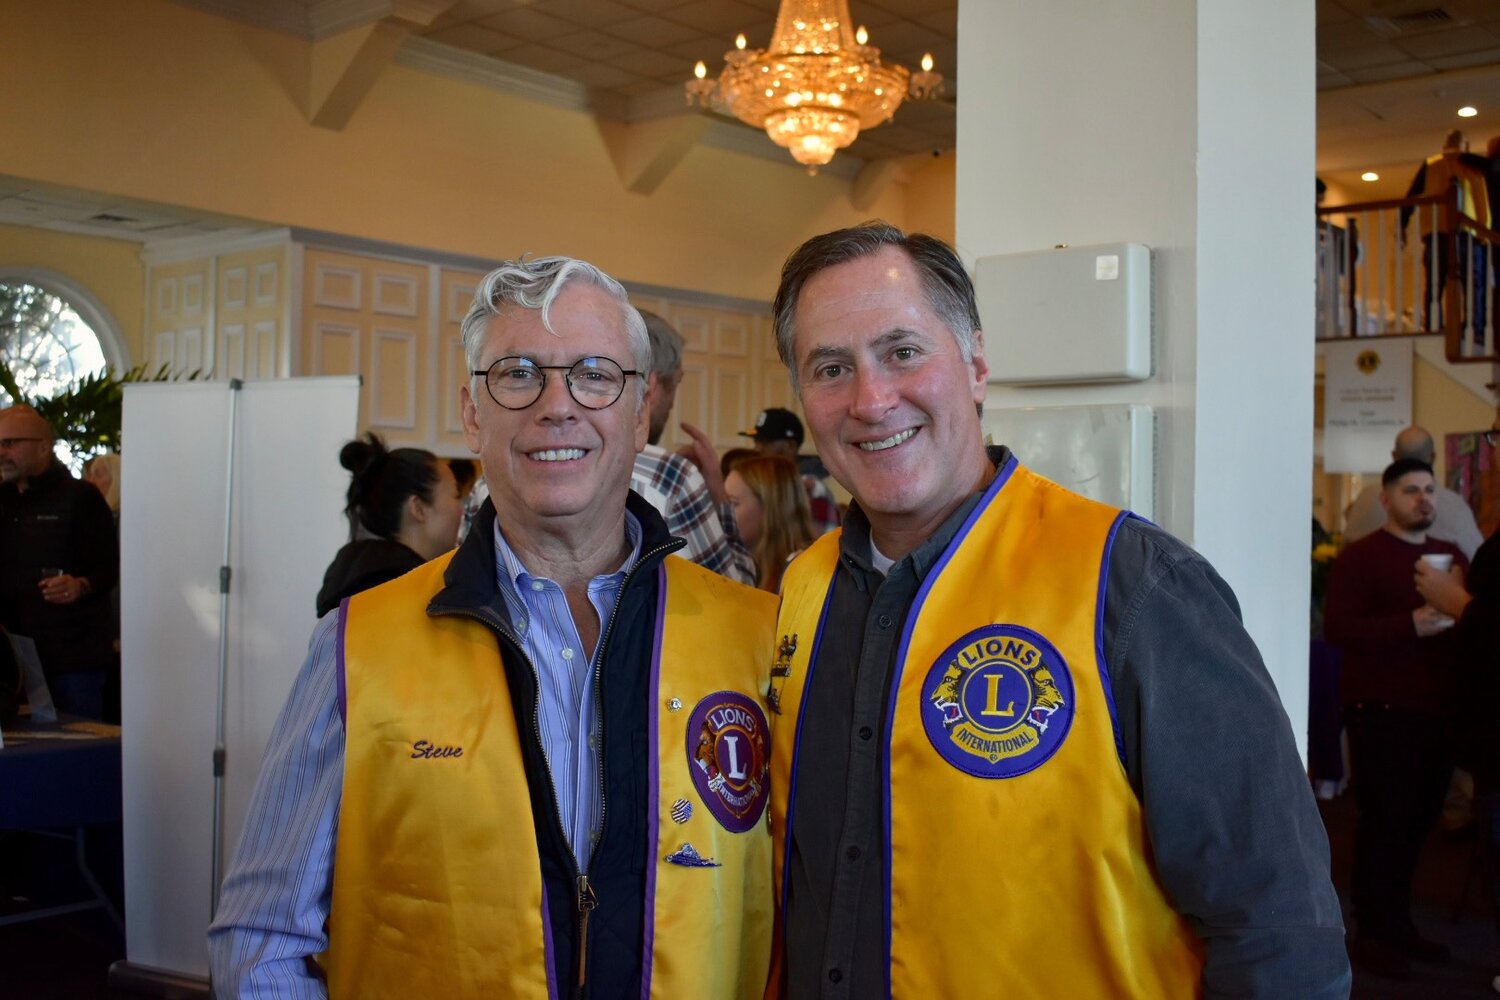 Members of the Bay Shore Lions Club, including Suffolk County Legis. Steve Flotteron and Joseph Fiorillo, were delighted by the massive turnout at the 14th annual Taste for Sight event.